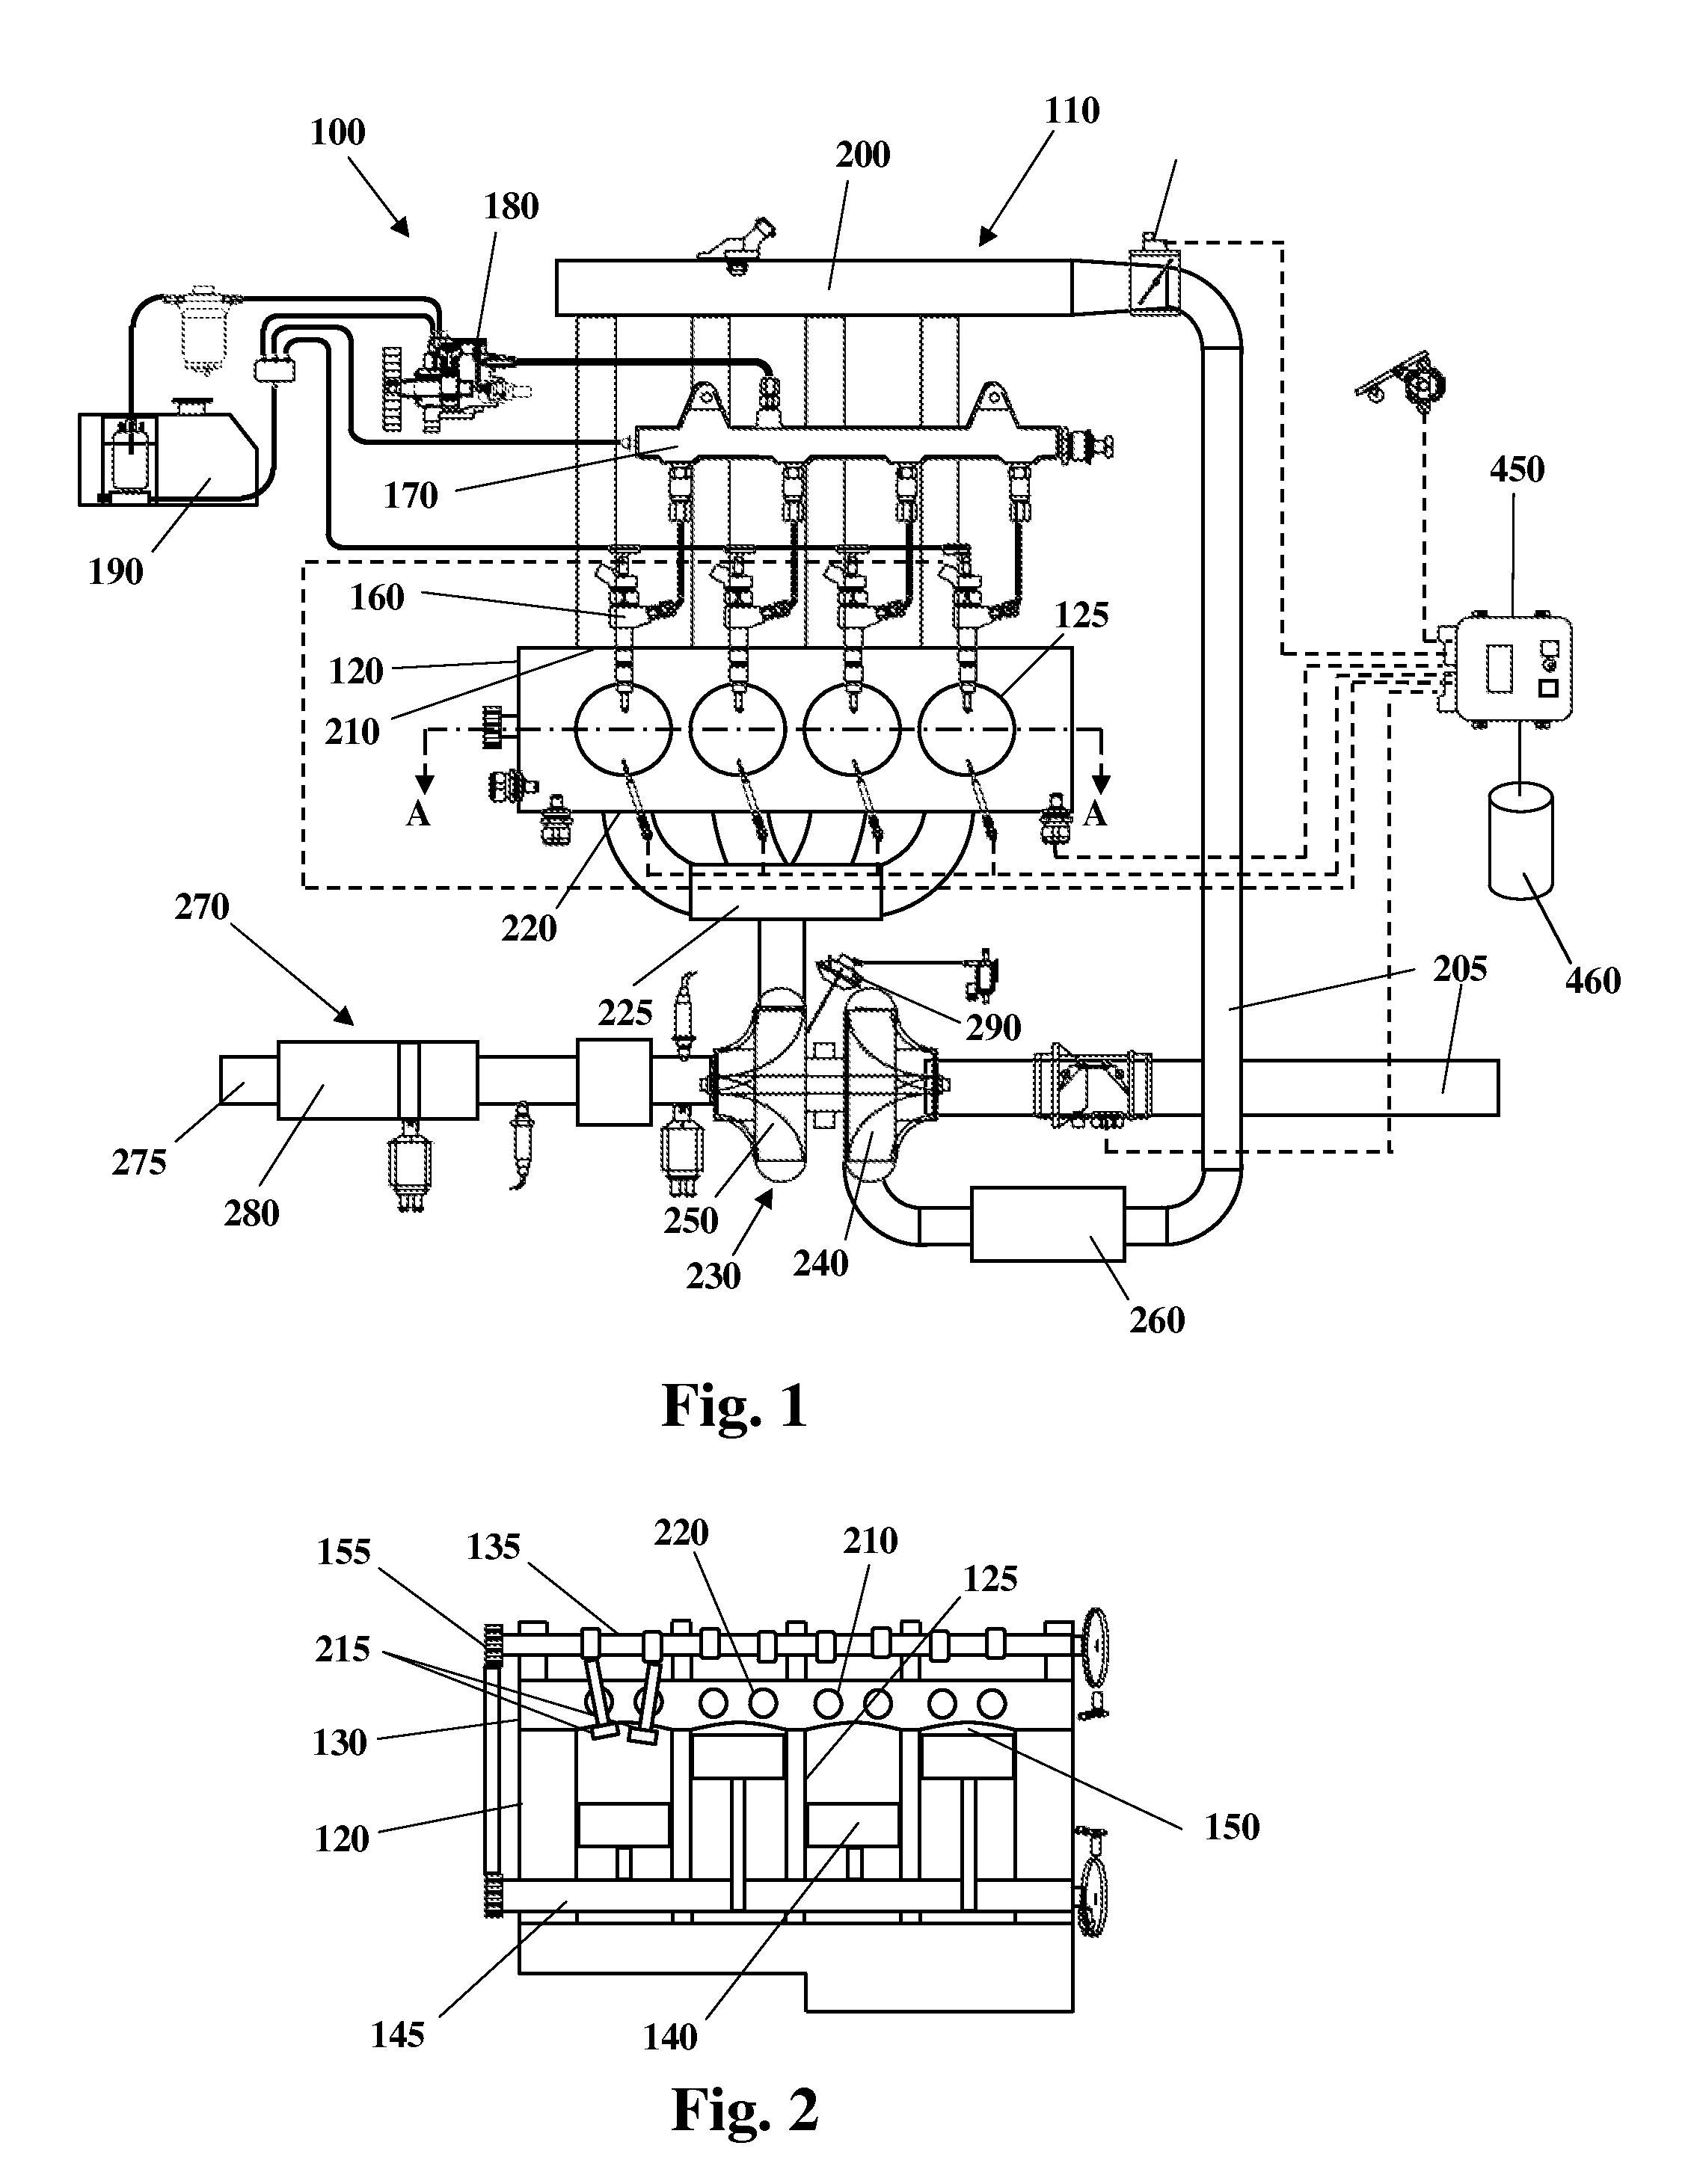 Exhaust gas recirculation system for an internal combustion engine